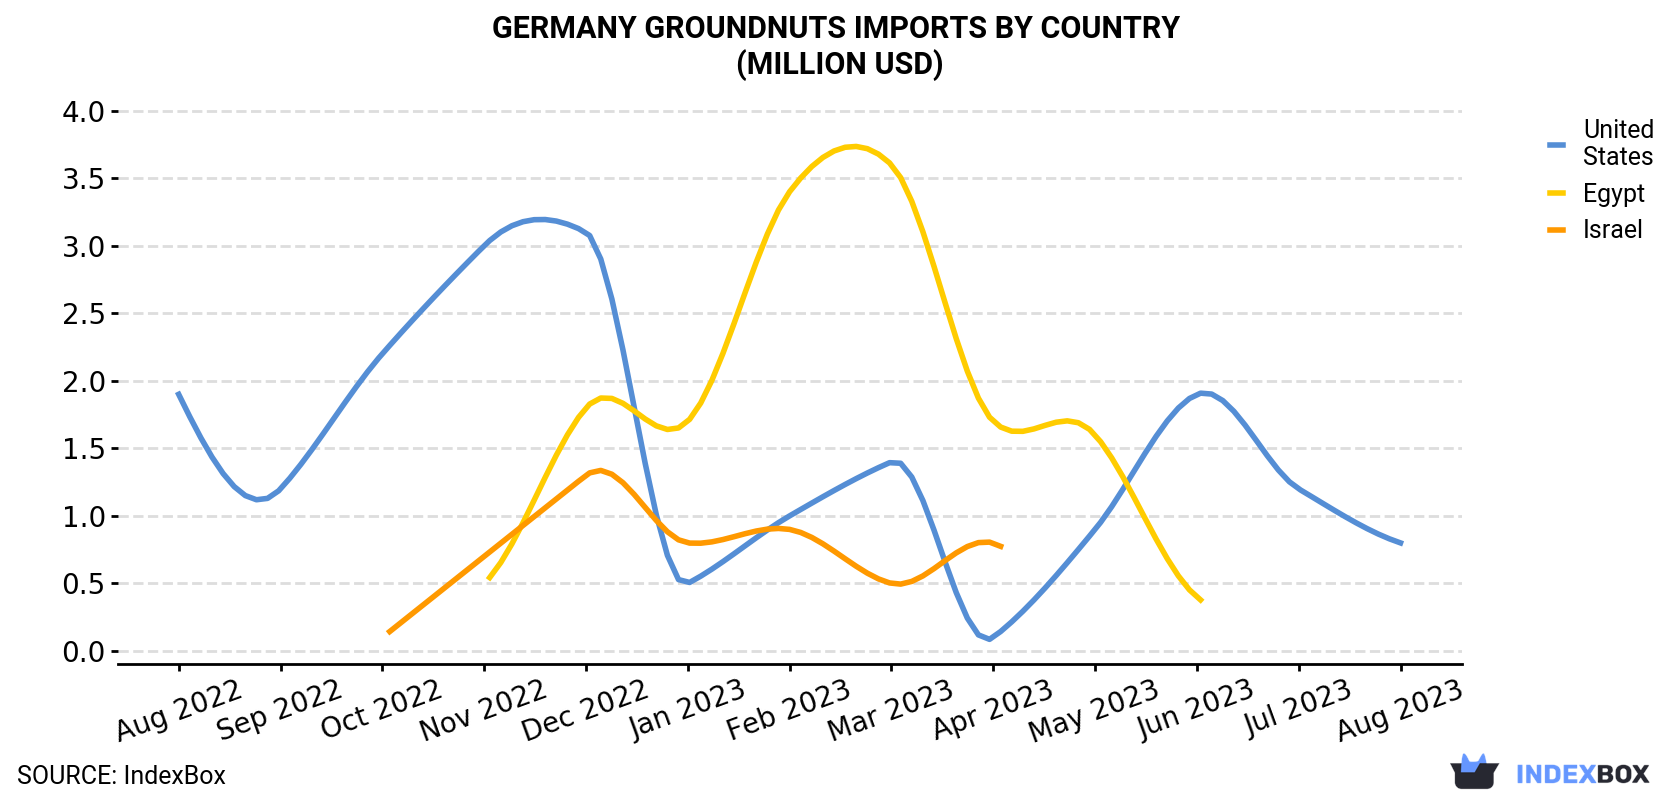 Germany Groundnuts Imports By Country (Million USD)